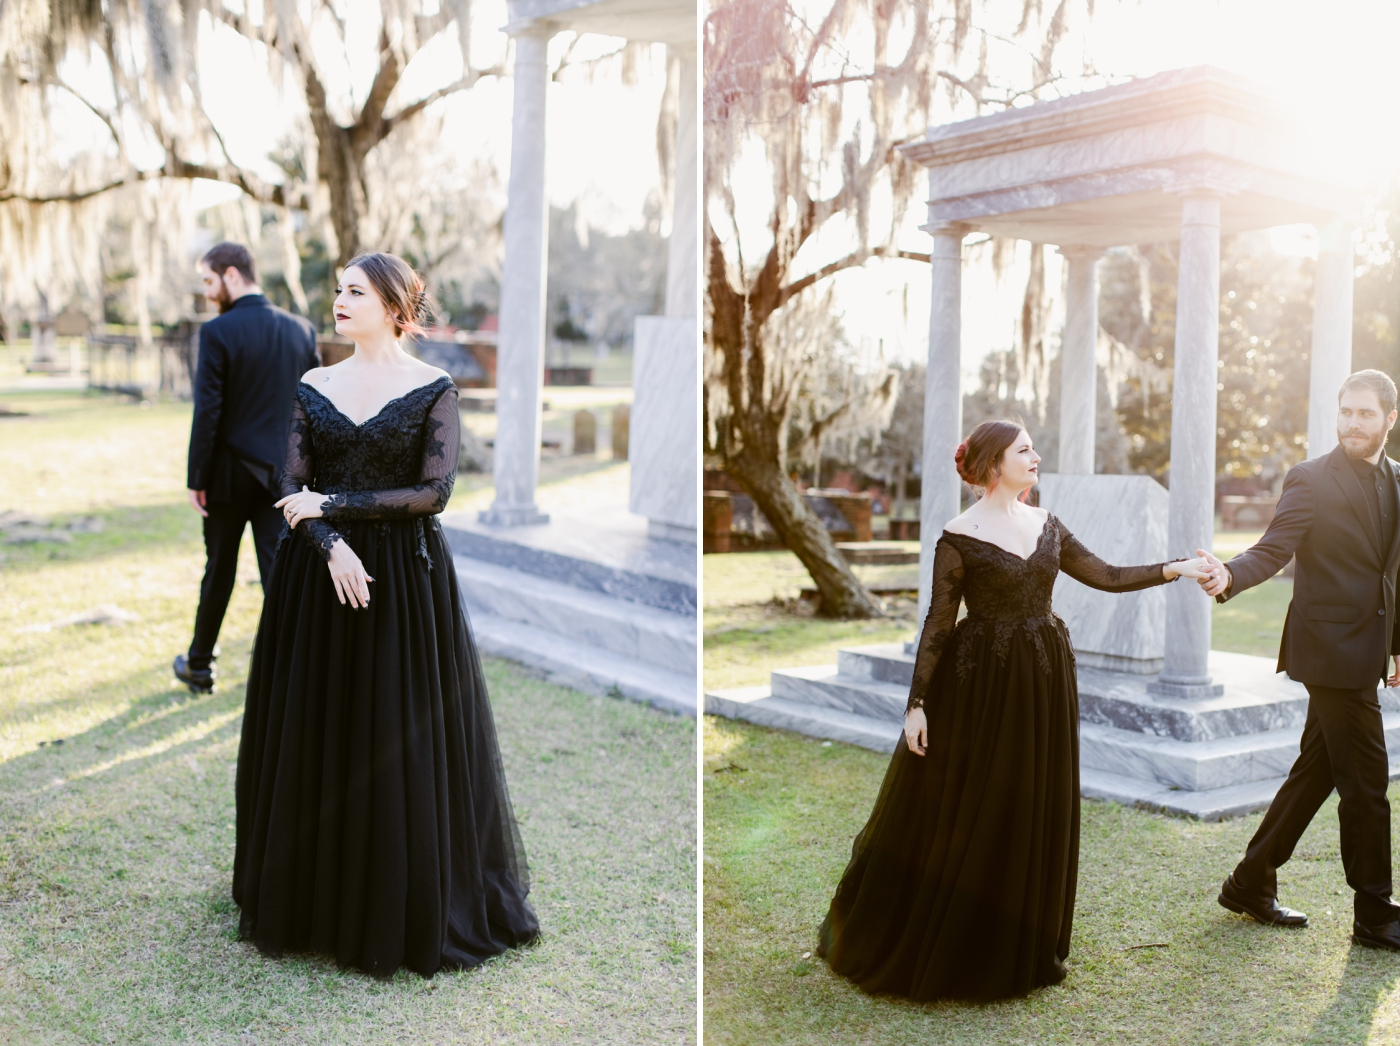 Anniversary session at Colonial Cemetary in Savannah